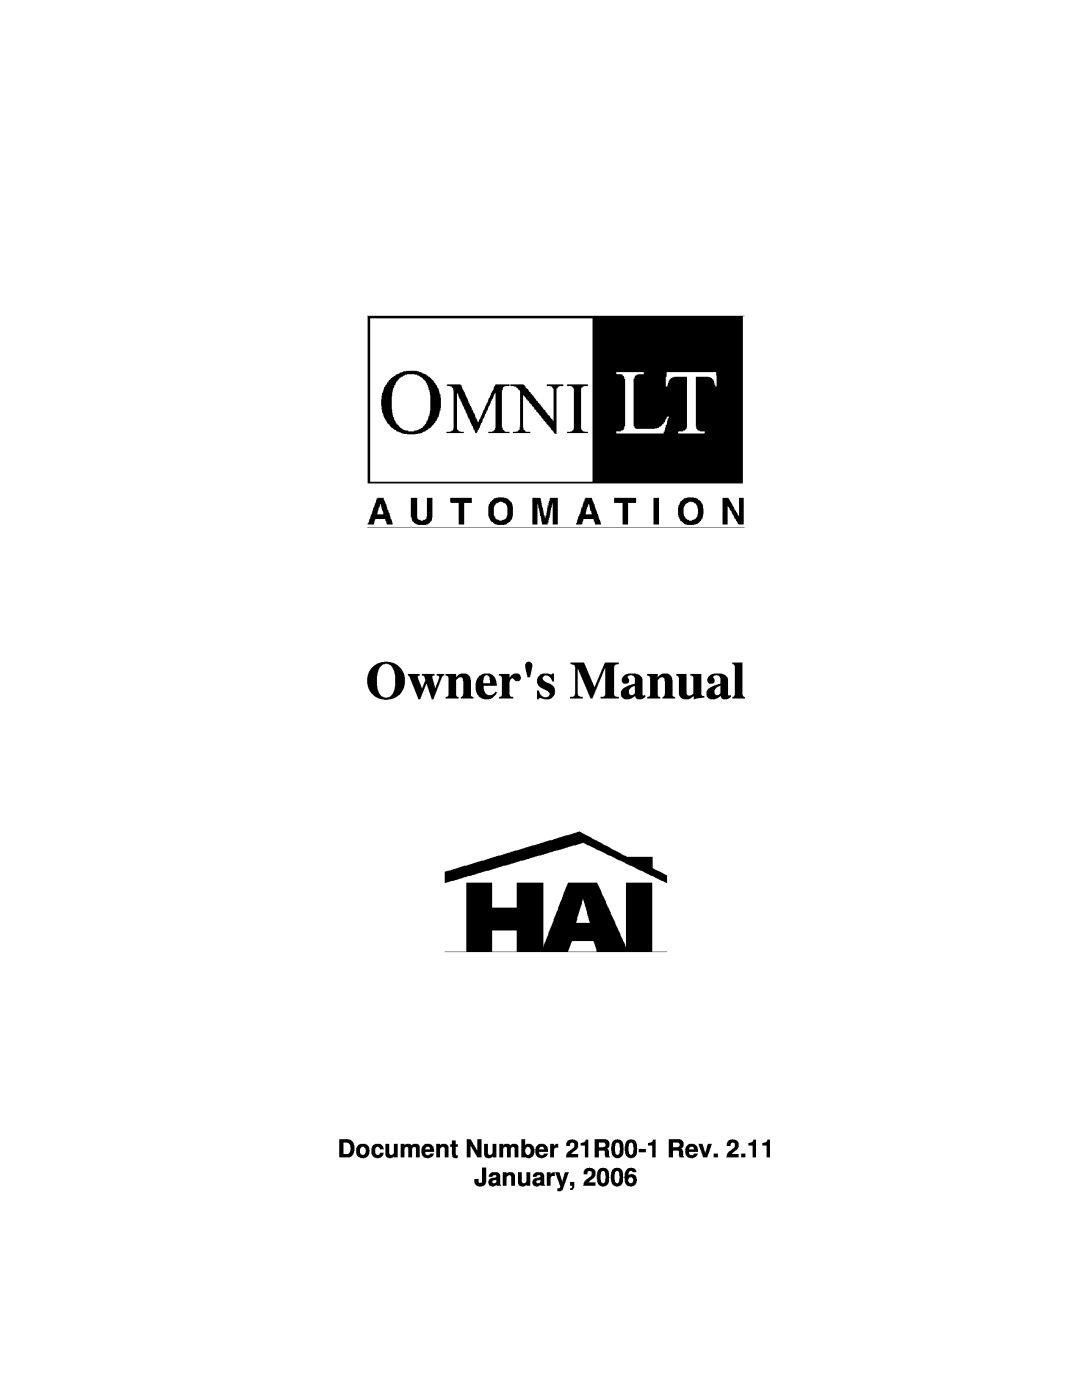 Home Automation SECURITY SYSTEM owner manual Document Number 21R00-1Rev. January 